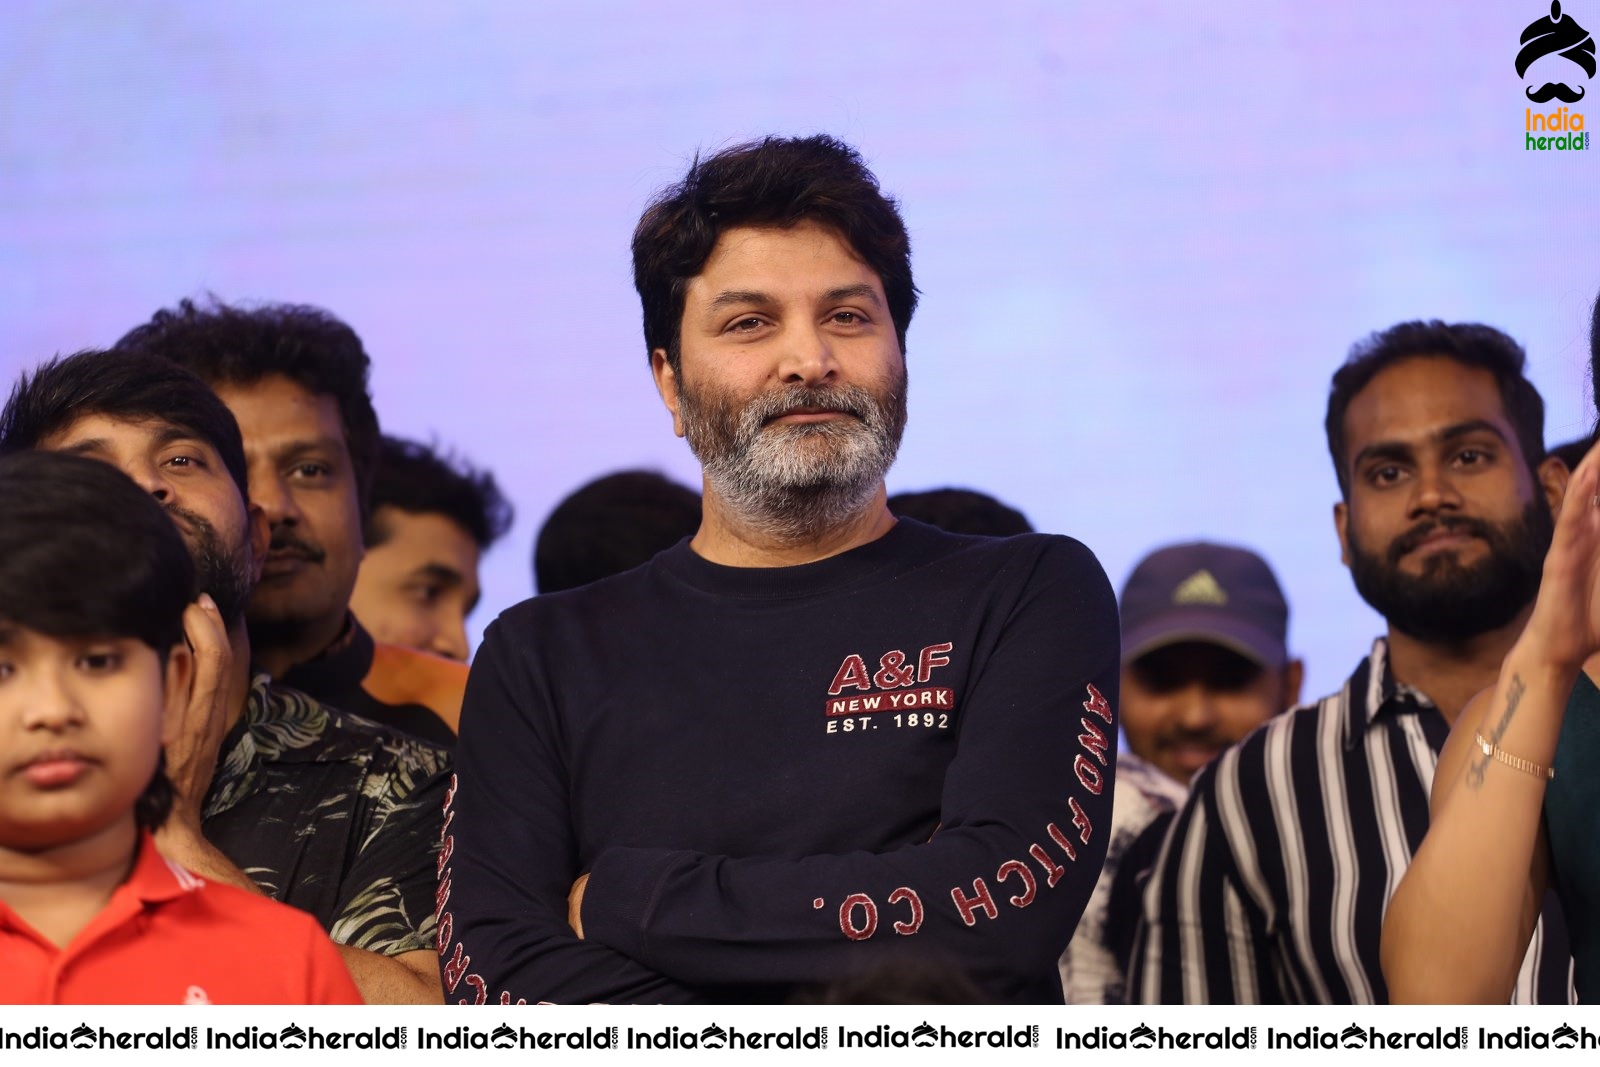 Director Trivikram Srinivas is all smiles and he has a Happy Gala time